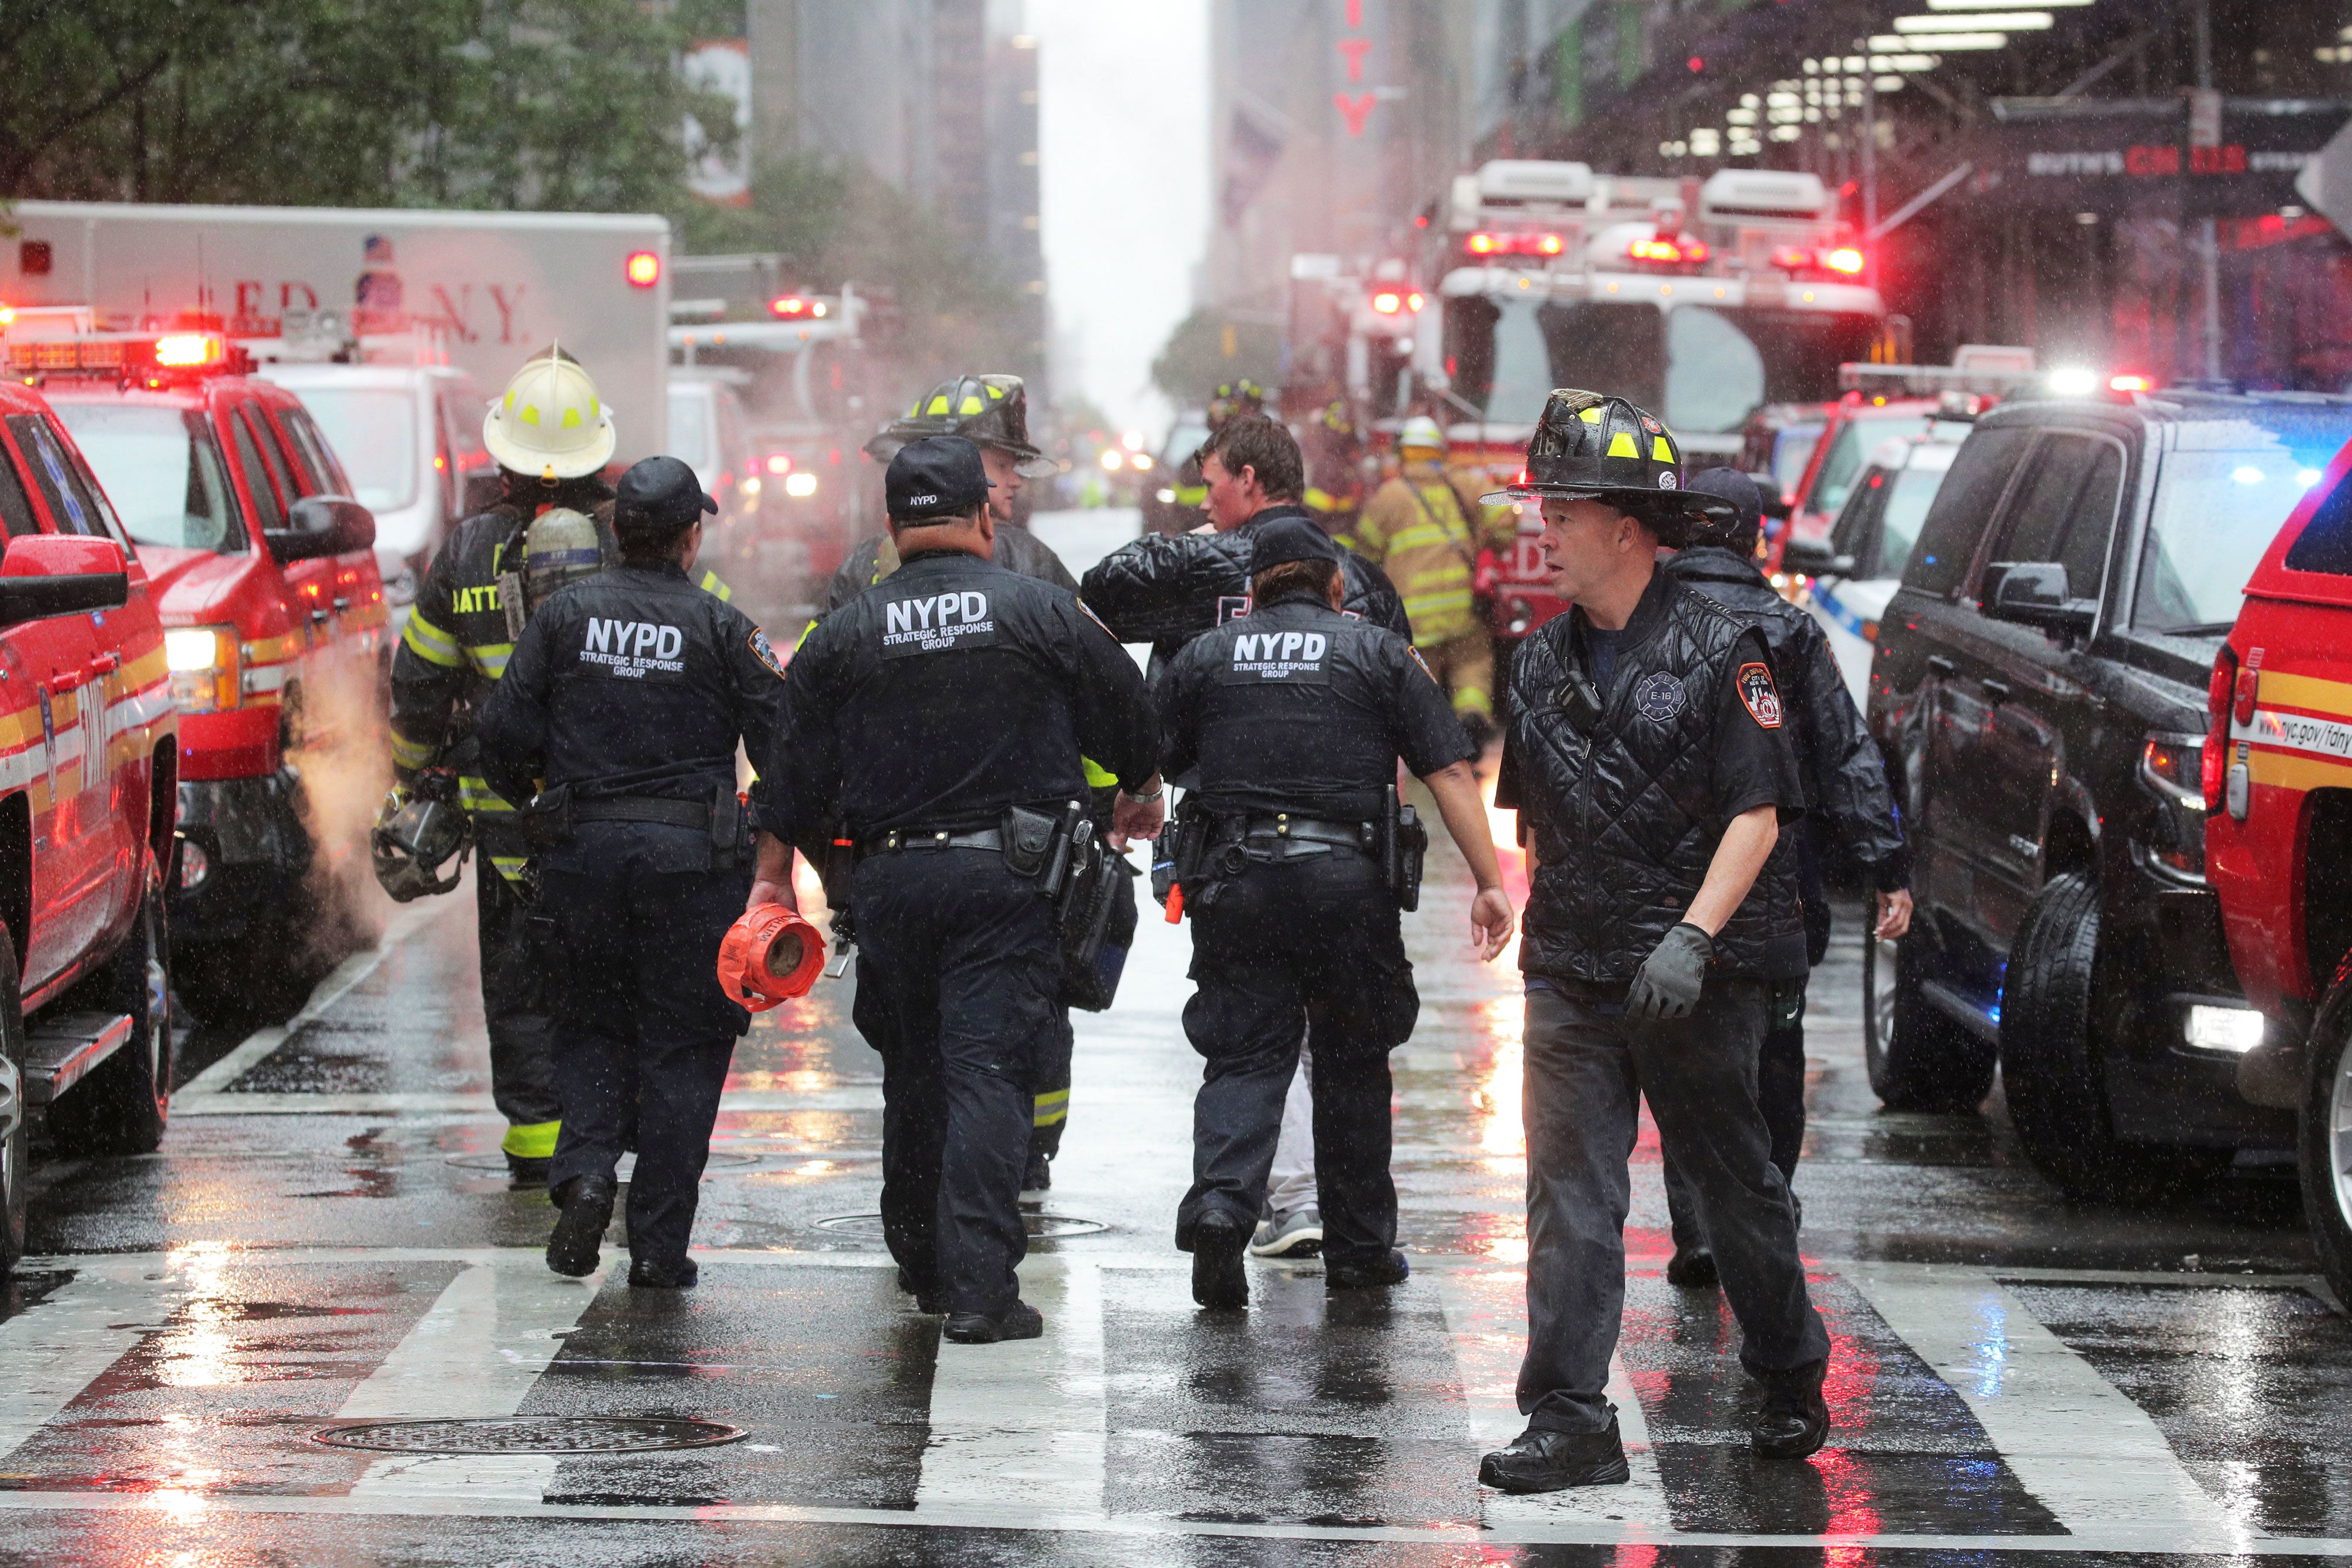 Helicopter crashes into building in midtown Manhattan